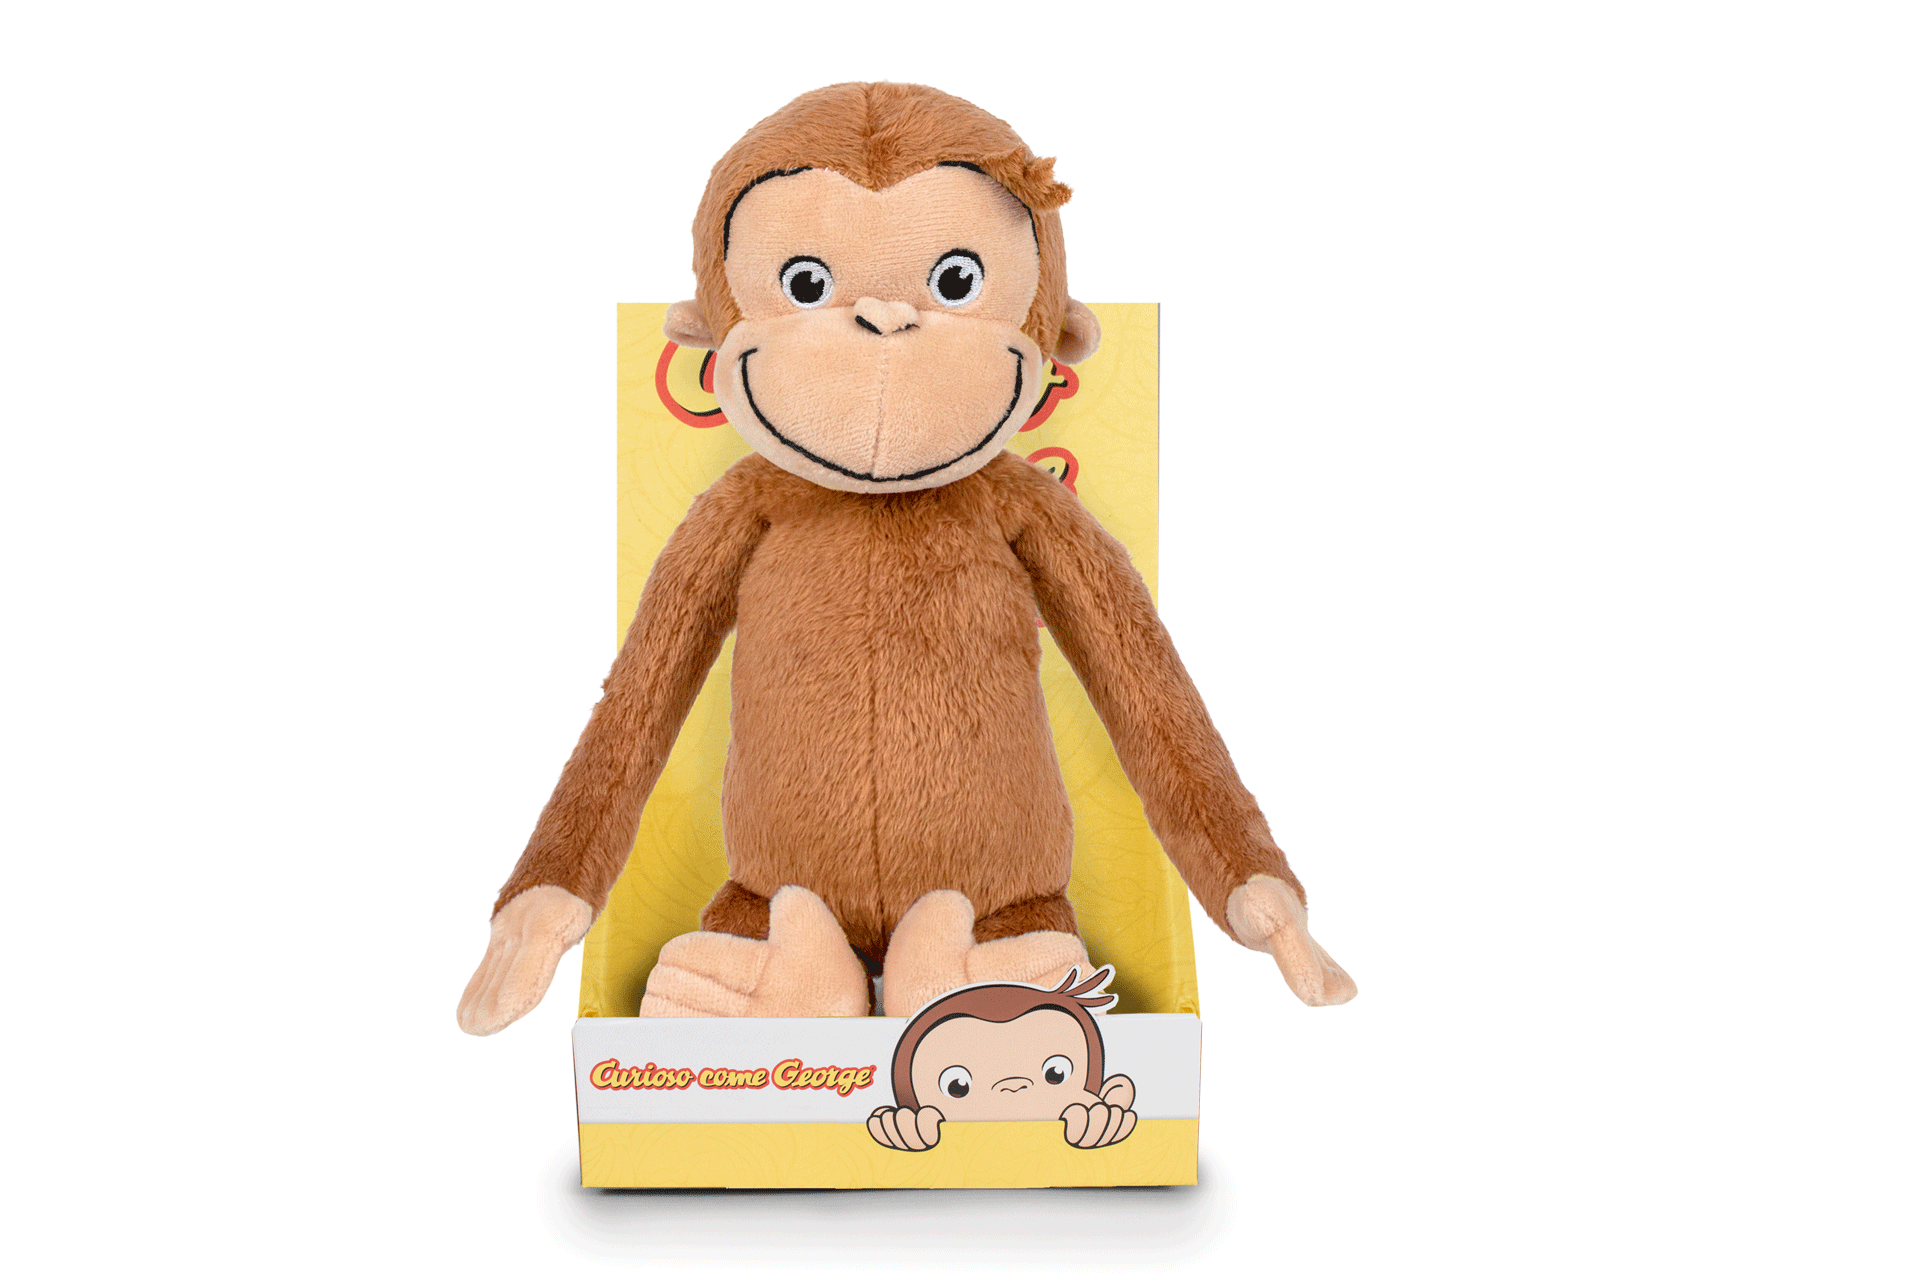 https://playbyplaytoys.es/wp-content/uploads/2022/02/760018212_curiousegeorge_universal_plushtoy_02.png